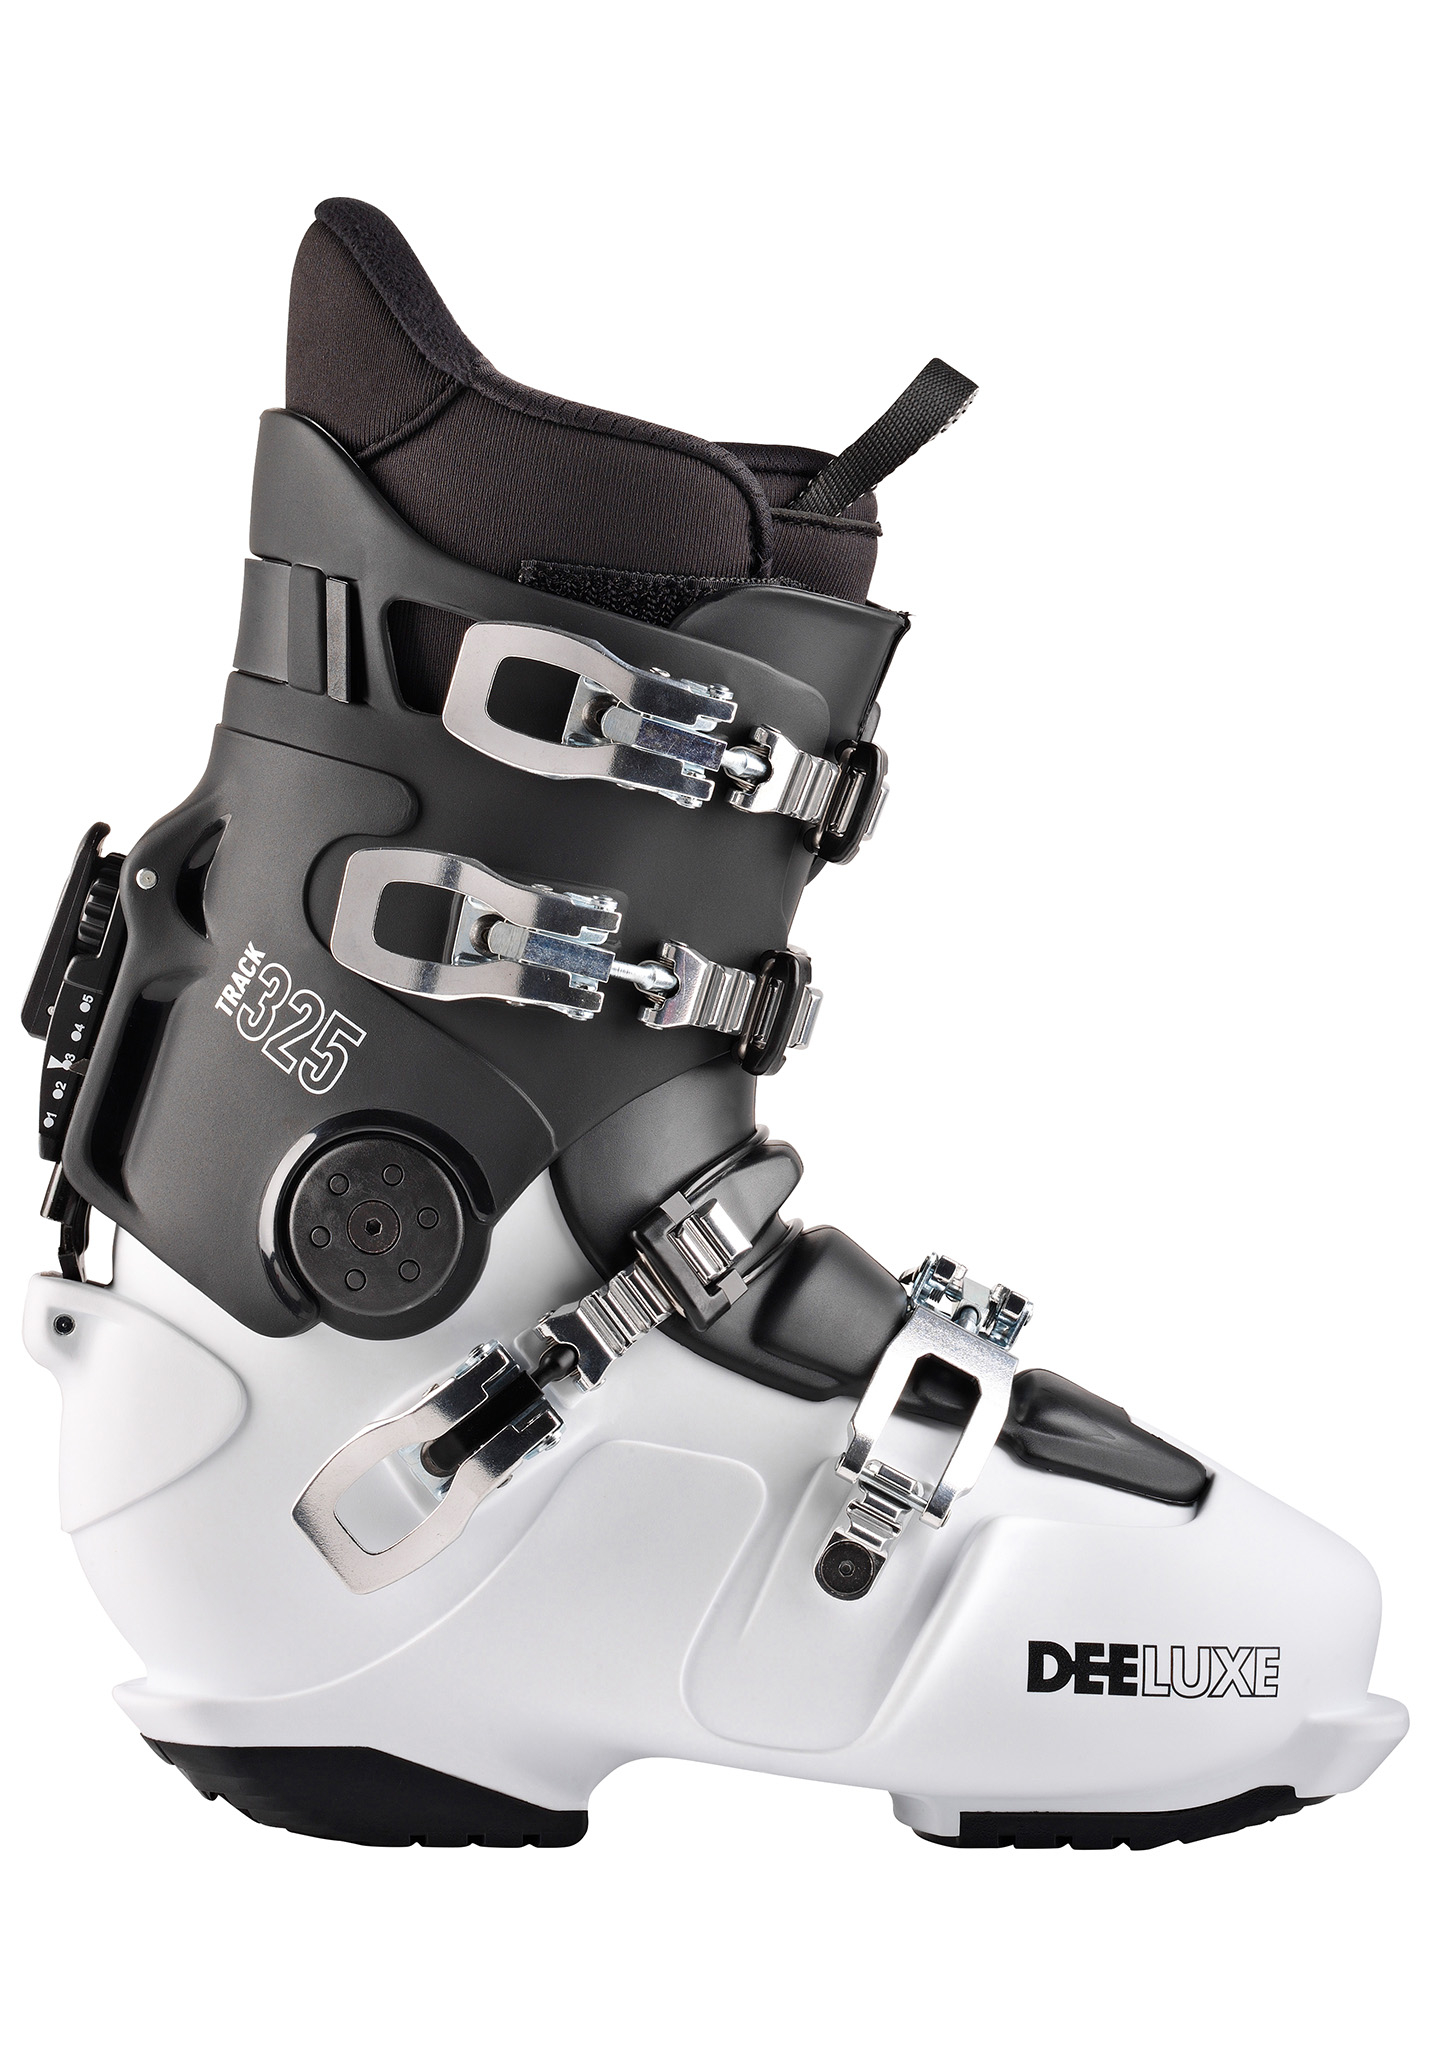 Deeluxe Track 325 Freestyle Snowboard Boots black-white 38